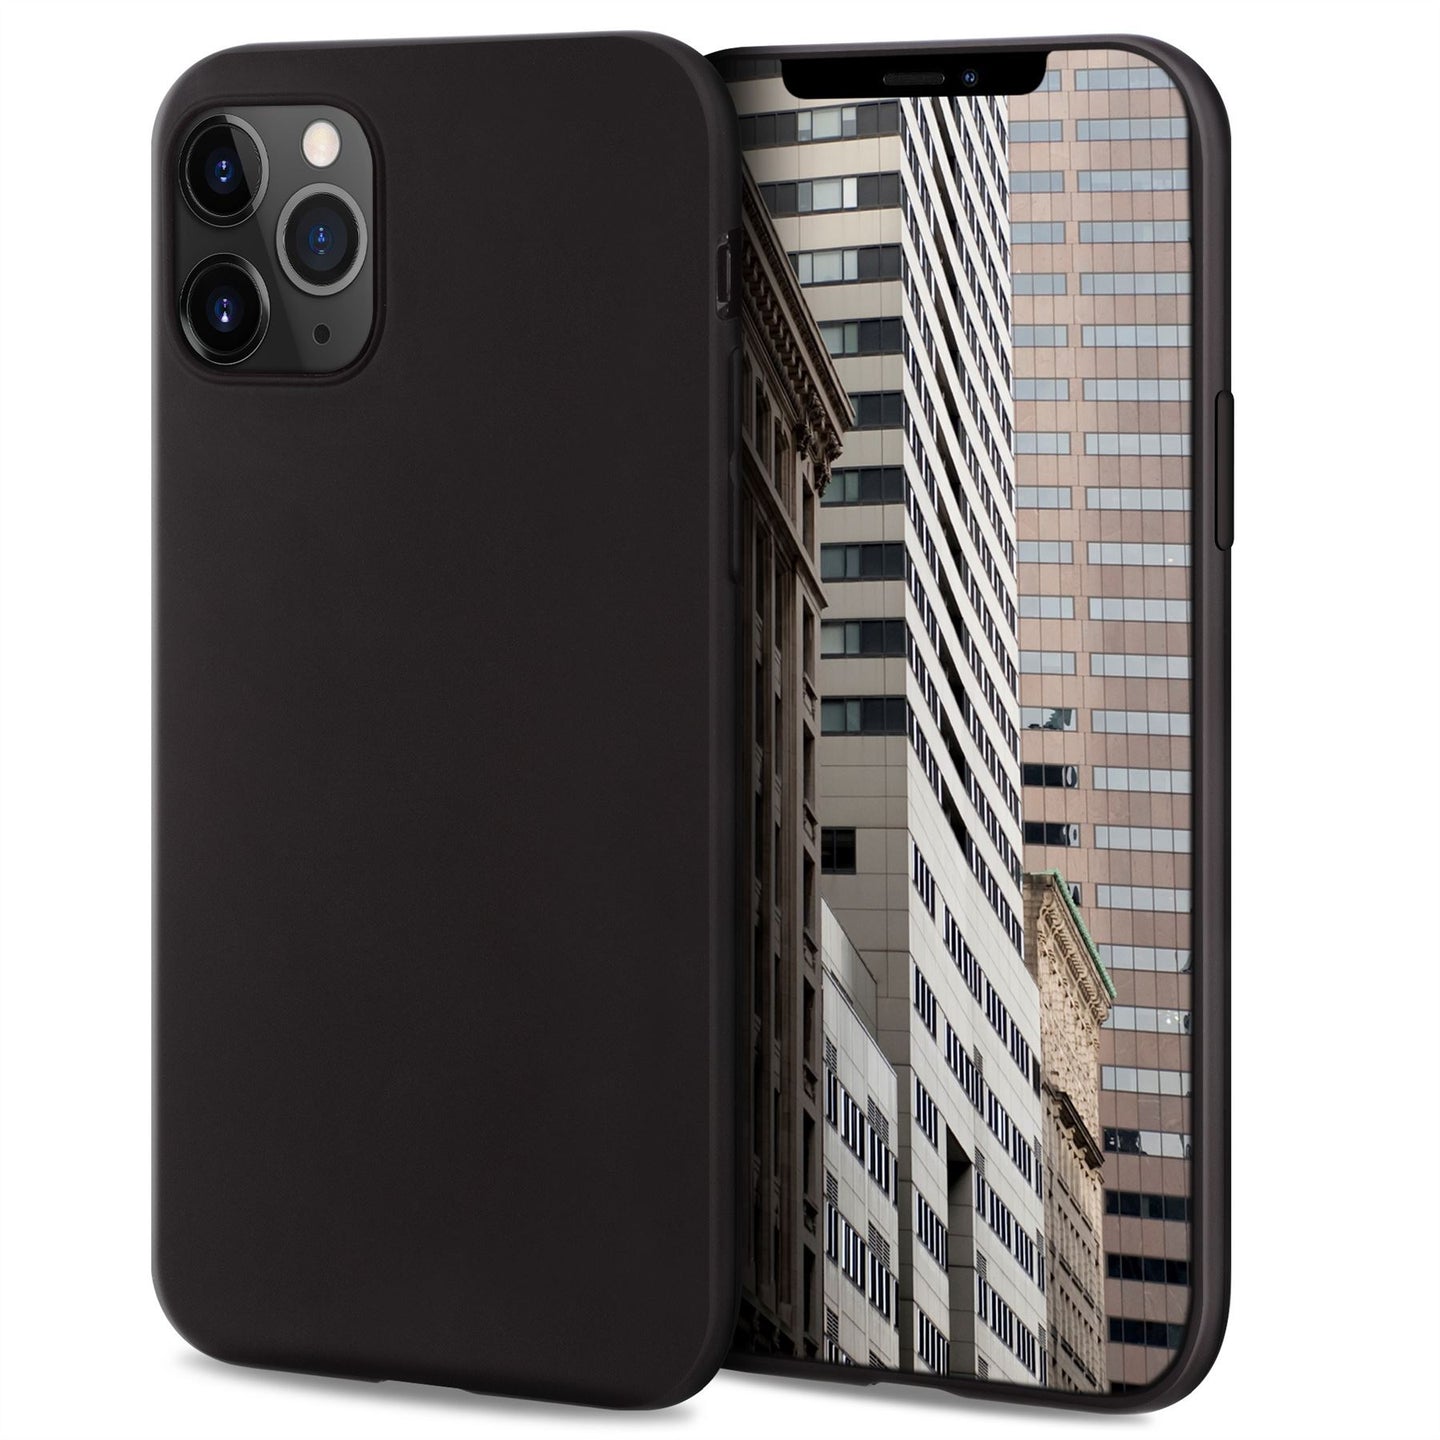 Moozy Lifestyle. Designed for iPhone 12, iPhone 12 Pro Case, Black - Liquid Silicone Cover with Matte Finish and Soft Microfiber Lining